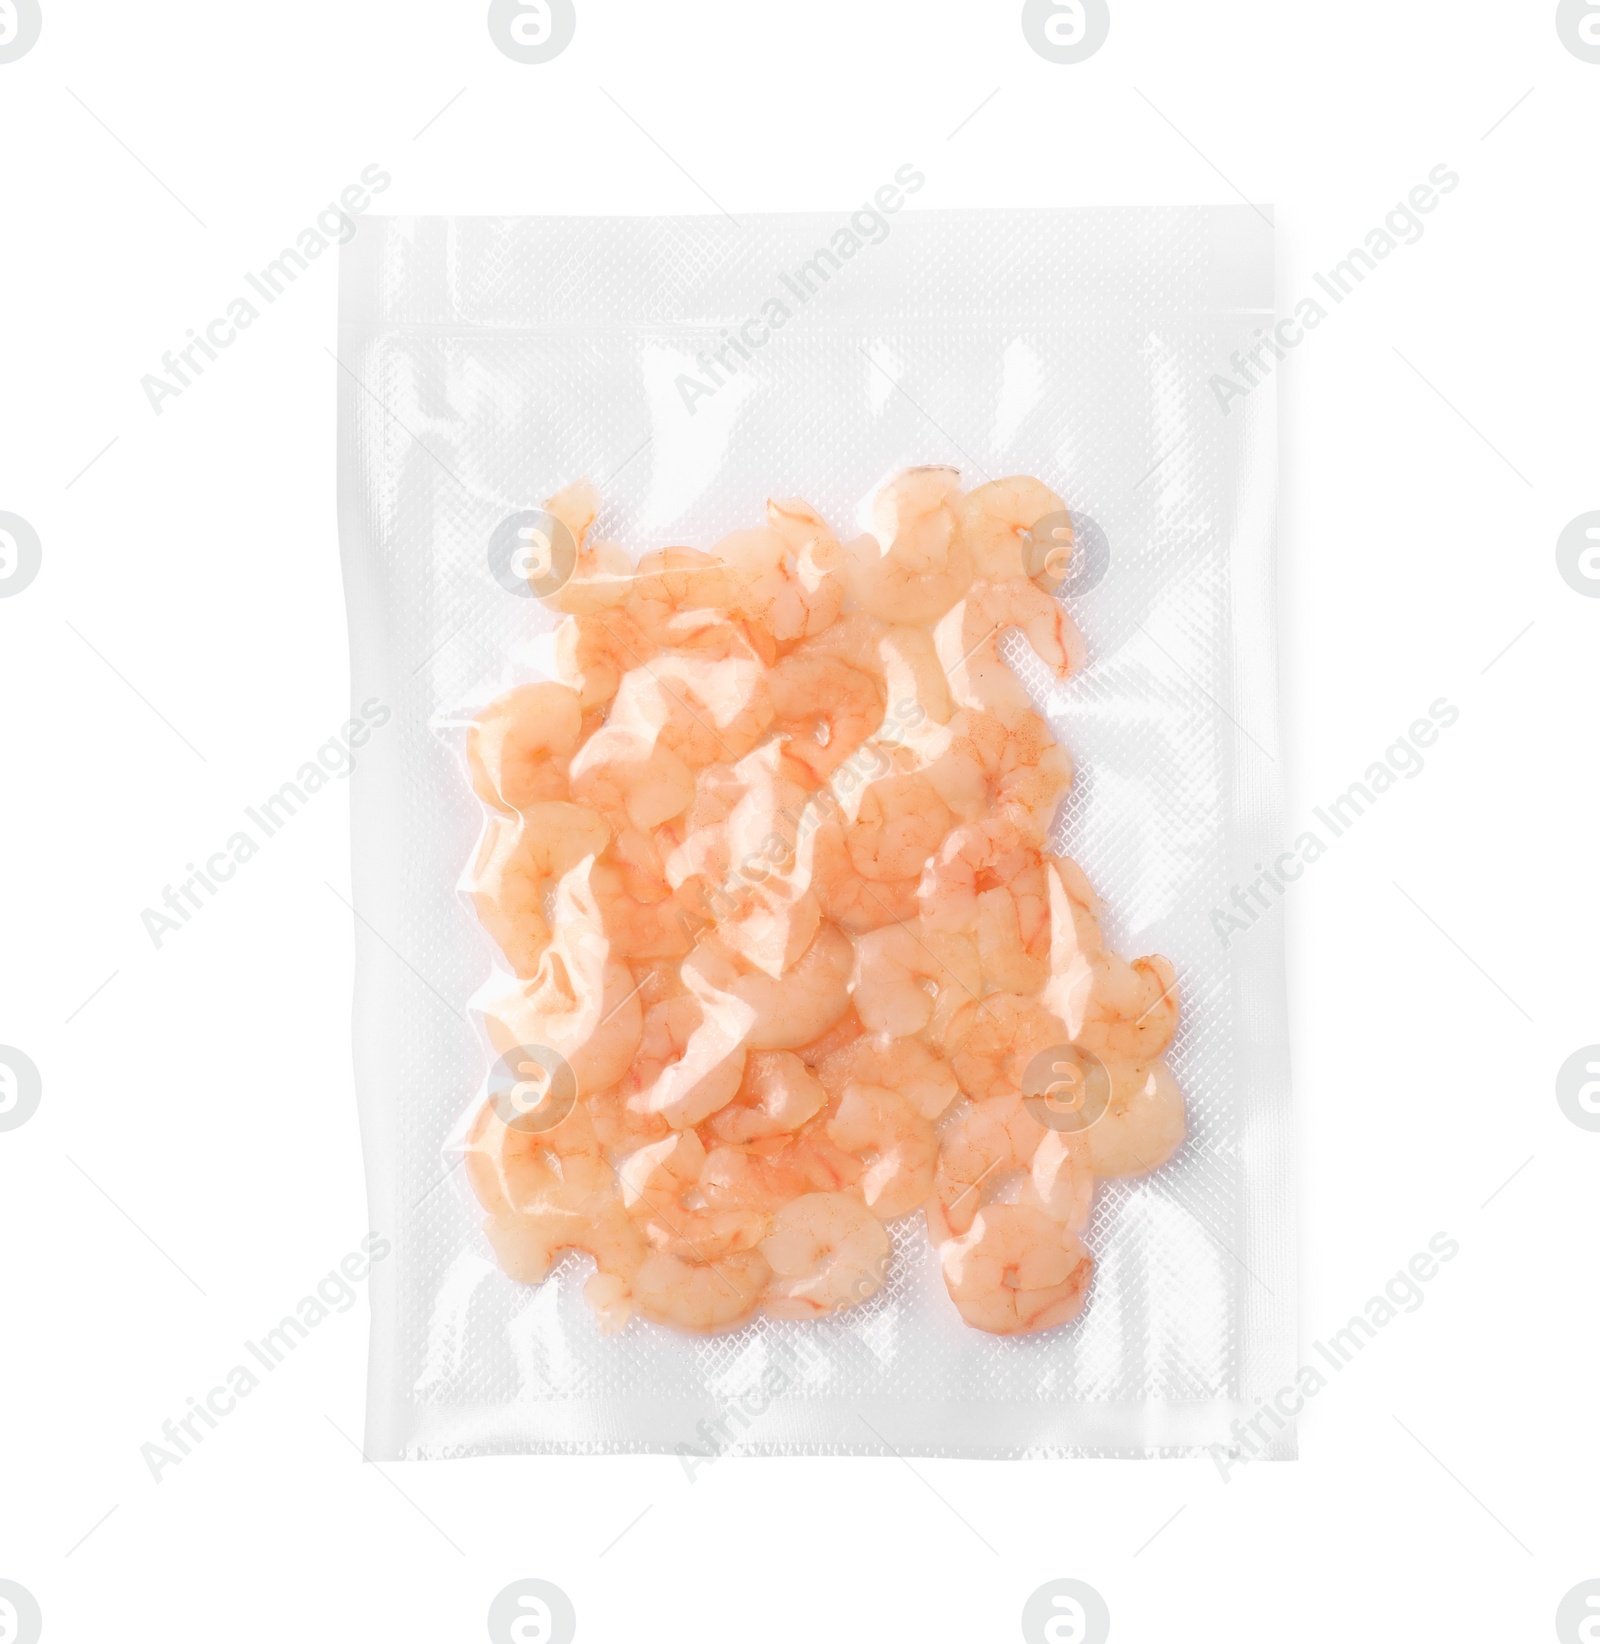 Photo of Shrimps in vacuum pack on white background, top view